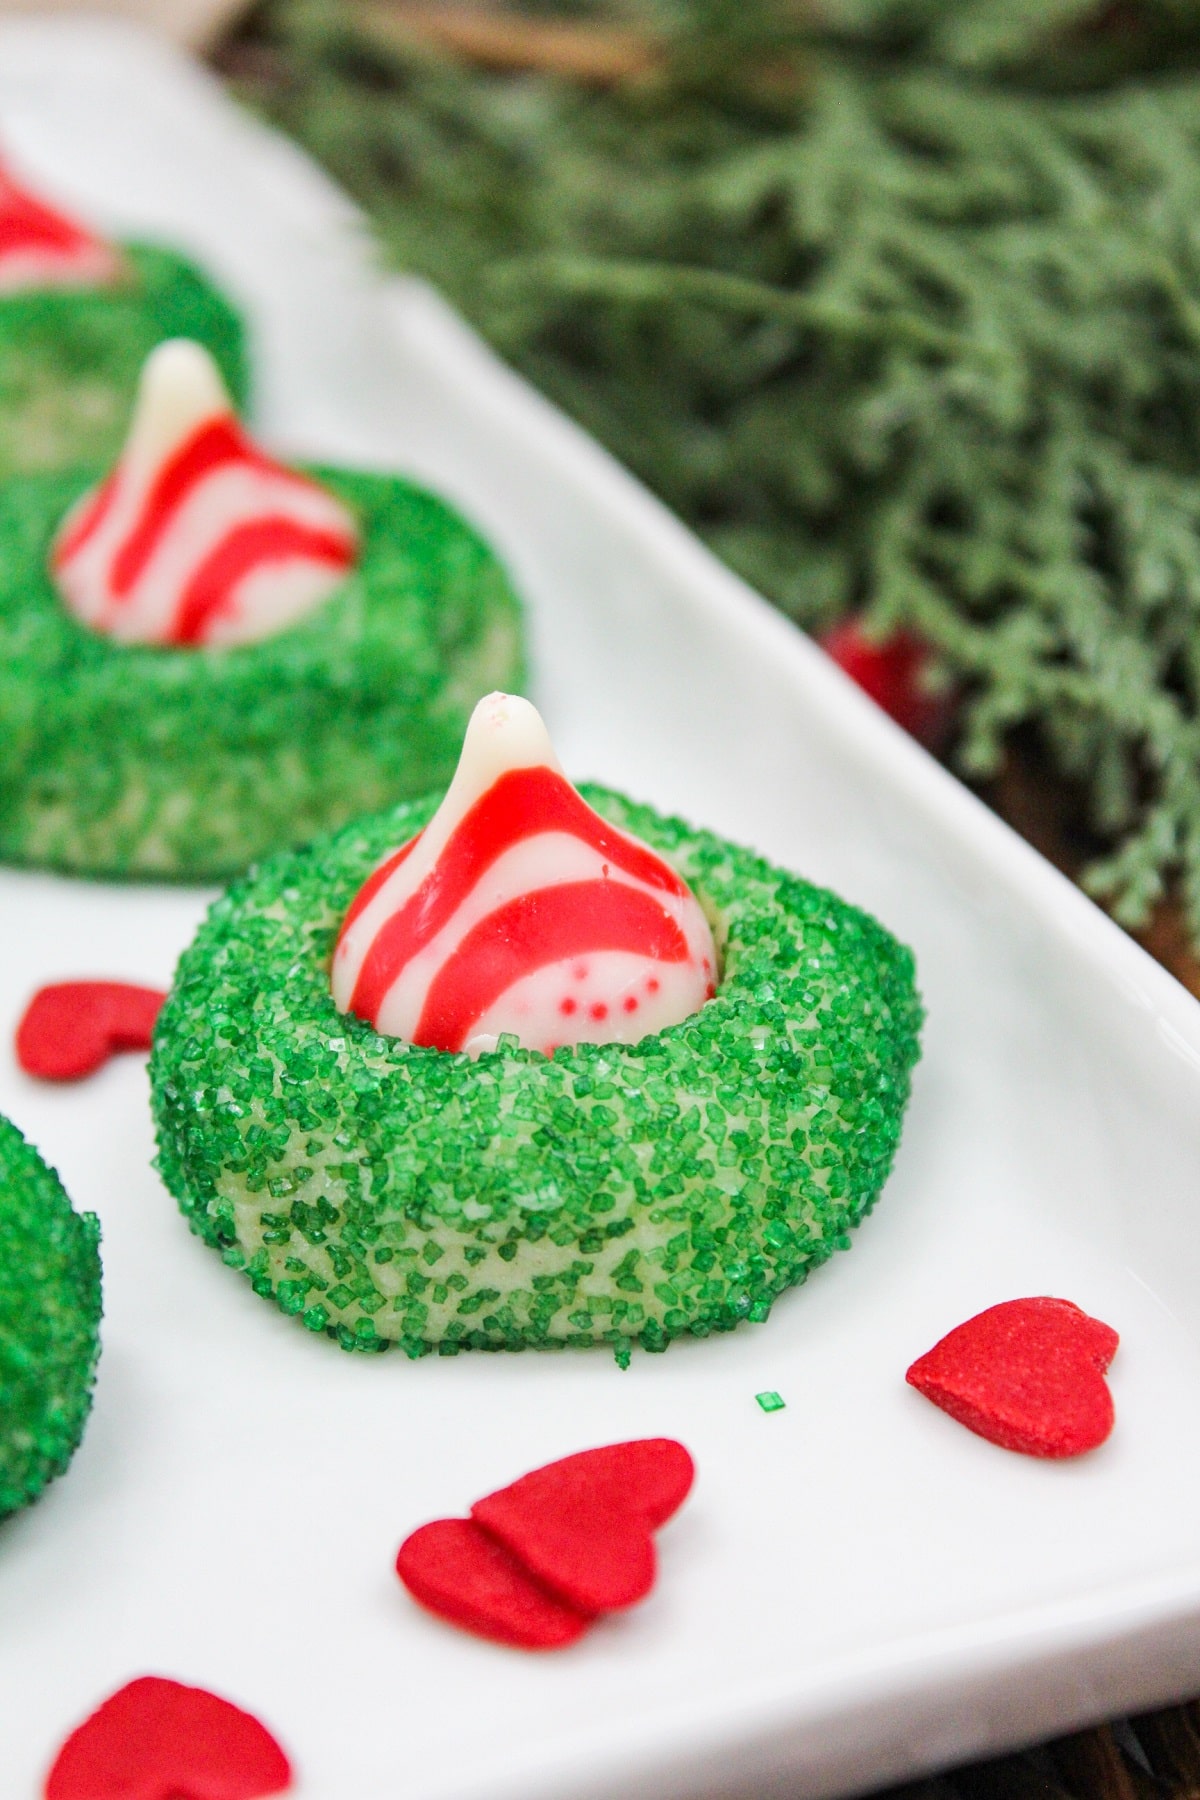 sugar cookies with small green sprinkles. A red and white kiss candy is placed in the middle. Cookies are served on a white plate. 